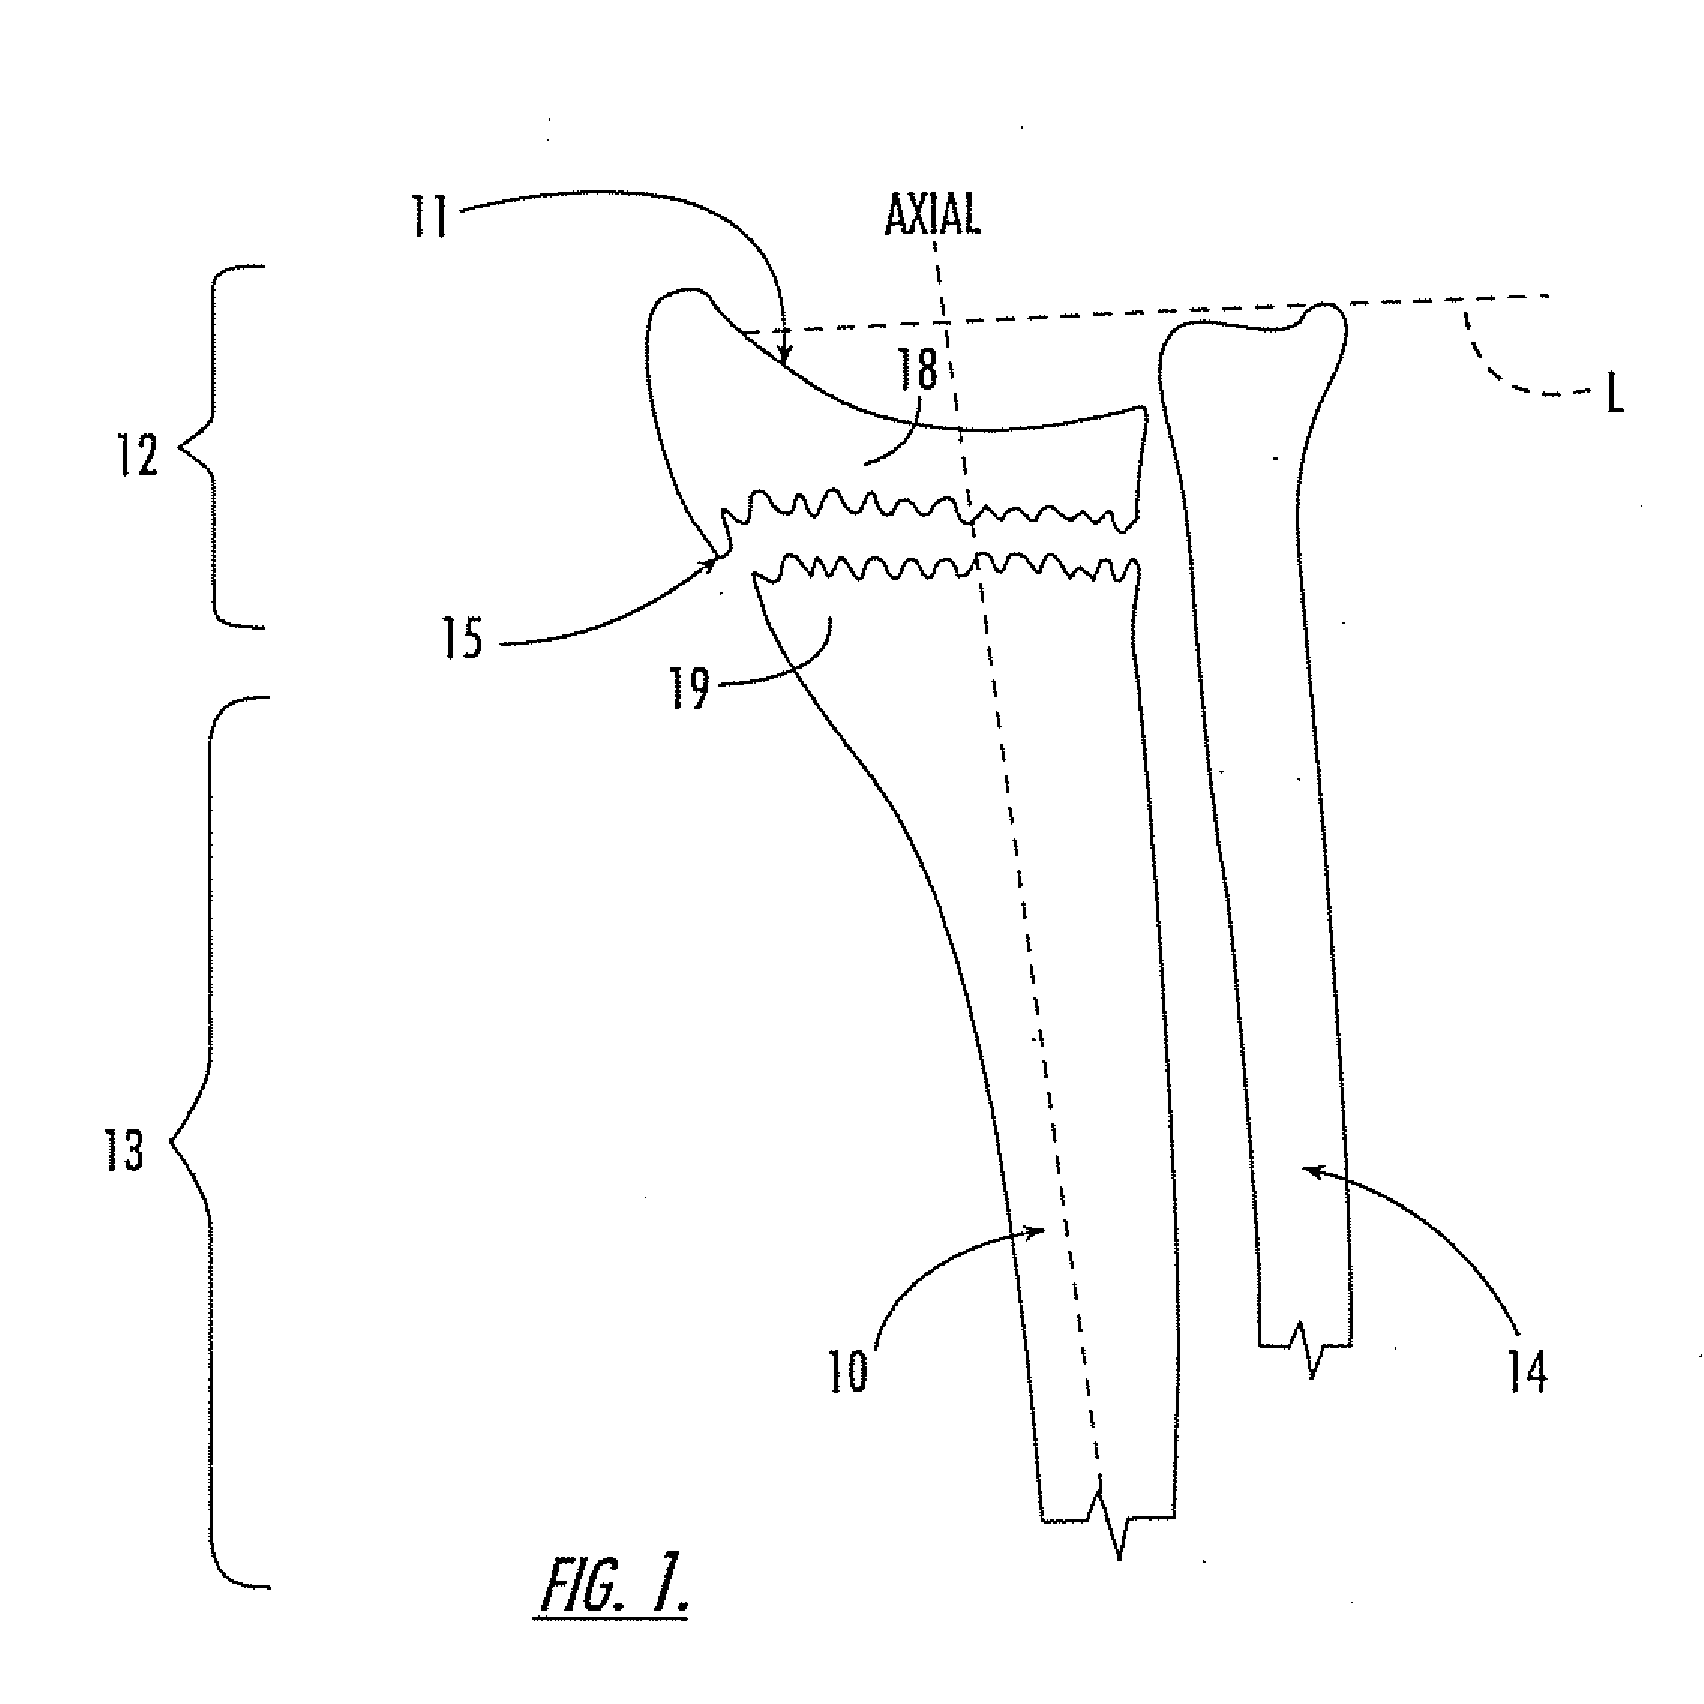 Kits with intramedullary interlocking fixation devices for the distal radius